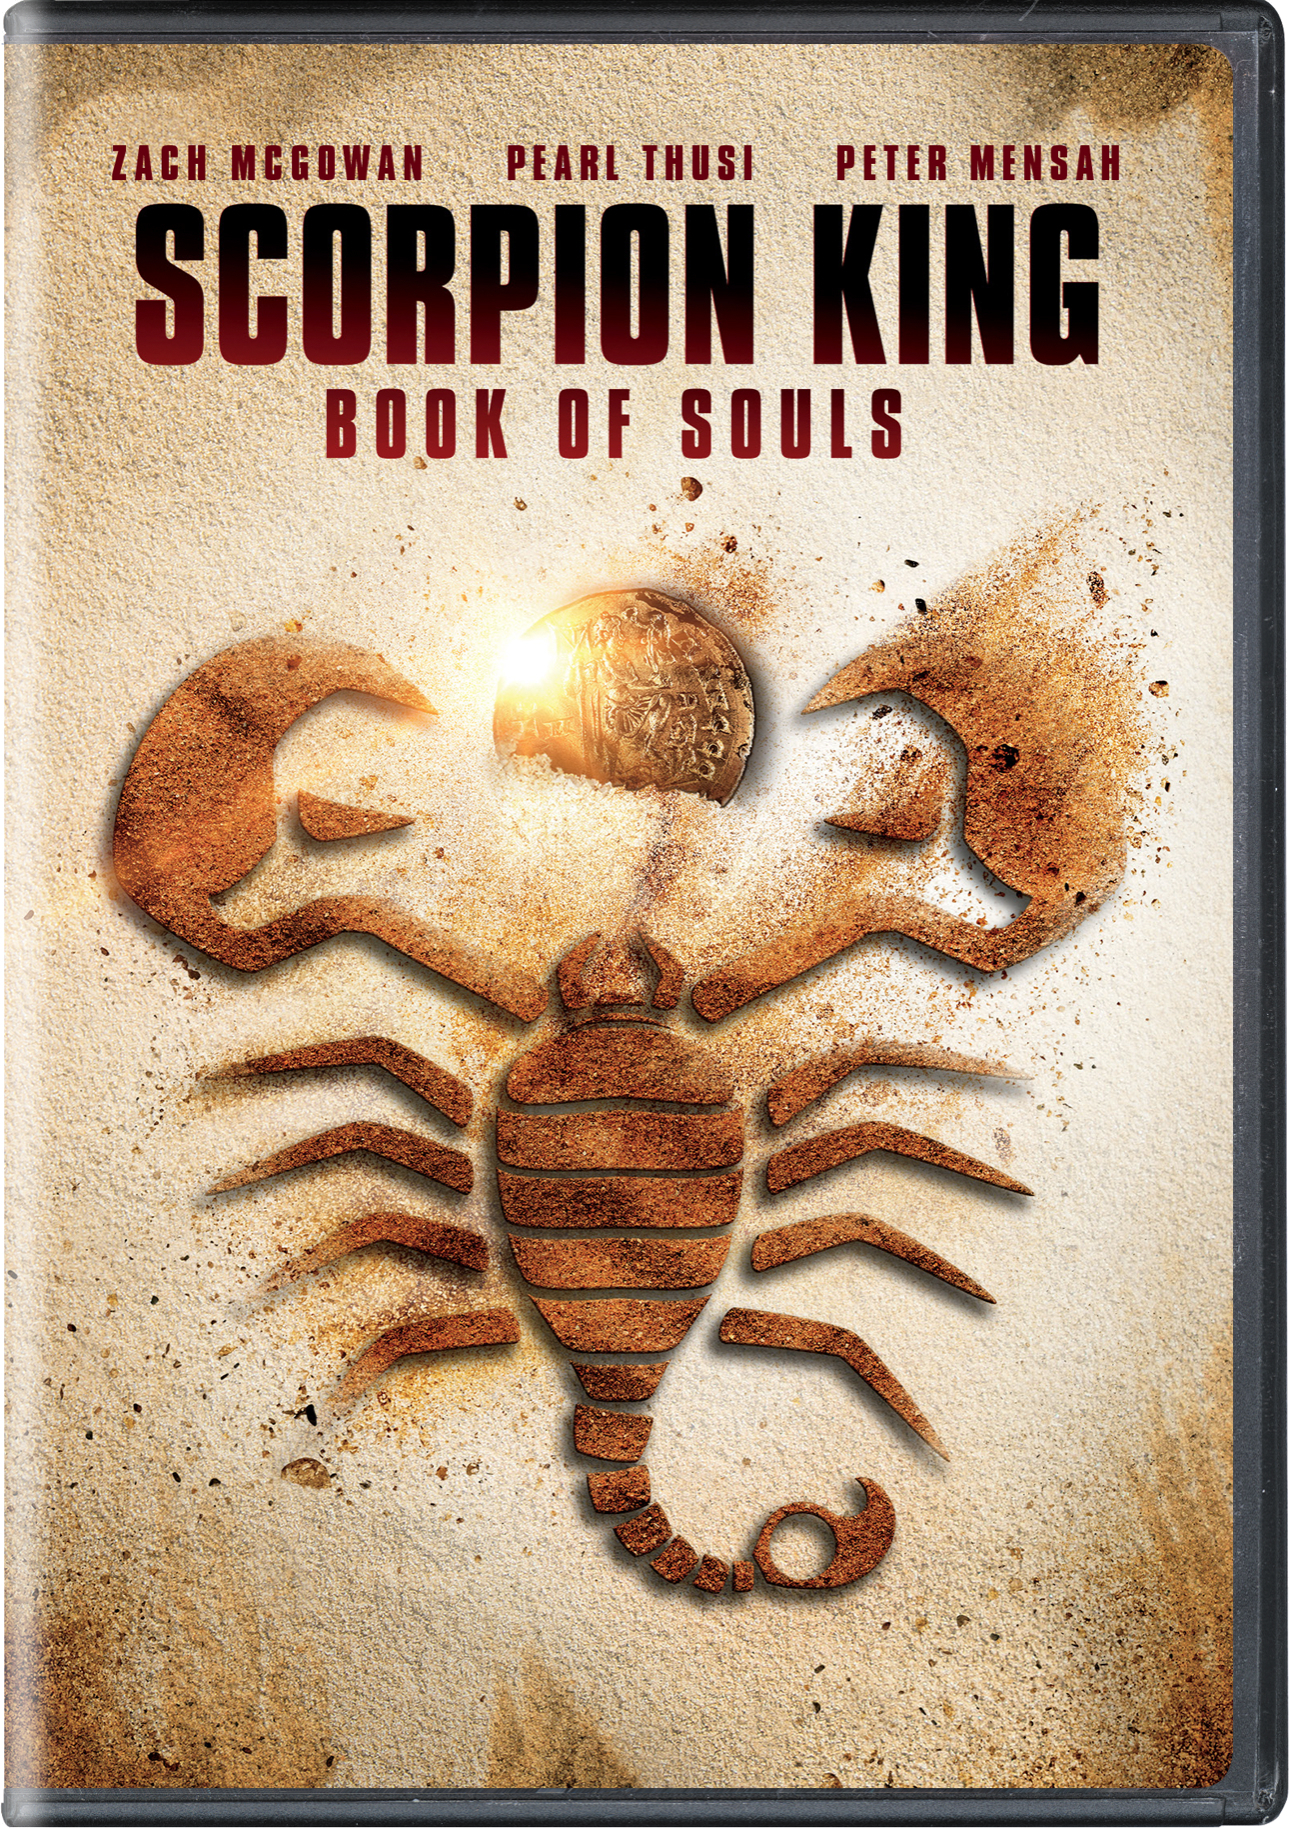 The Scorpion King - Book Of Souls - DVD [ 2018 ]  - Action Movies On DVD - Movies On GRUV